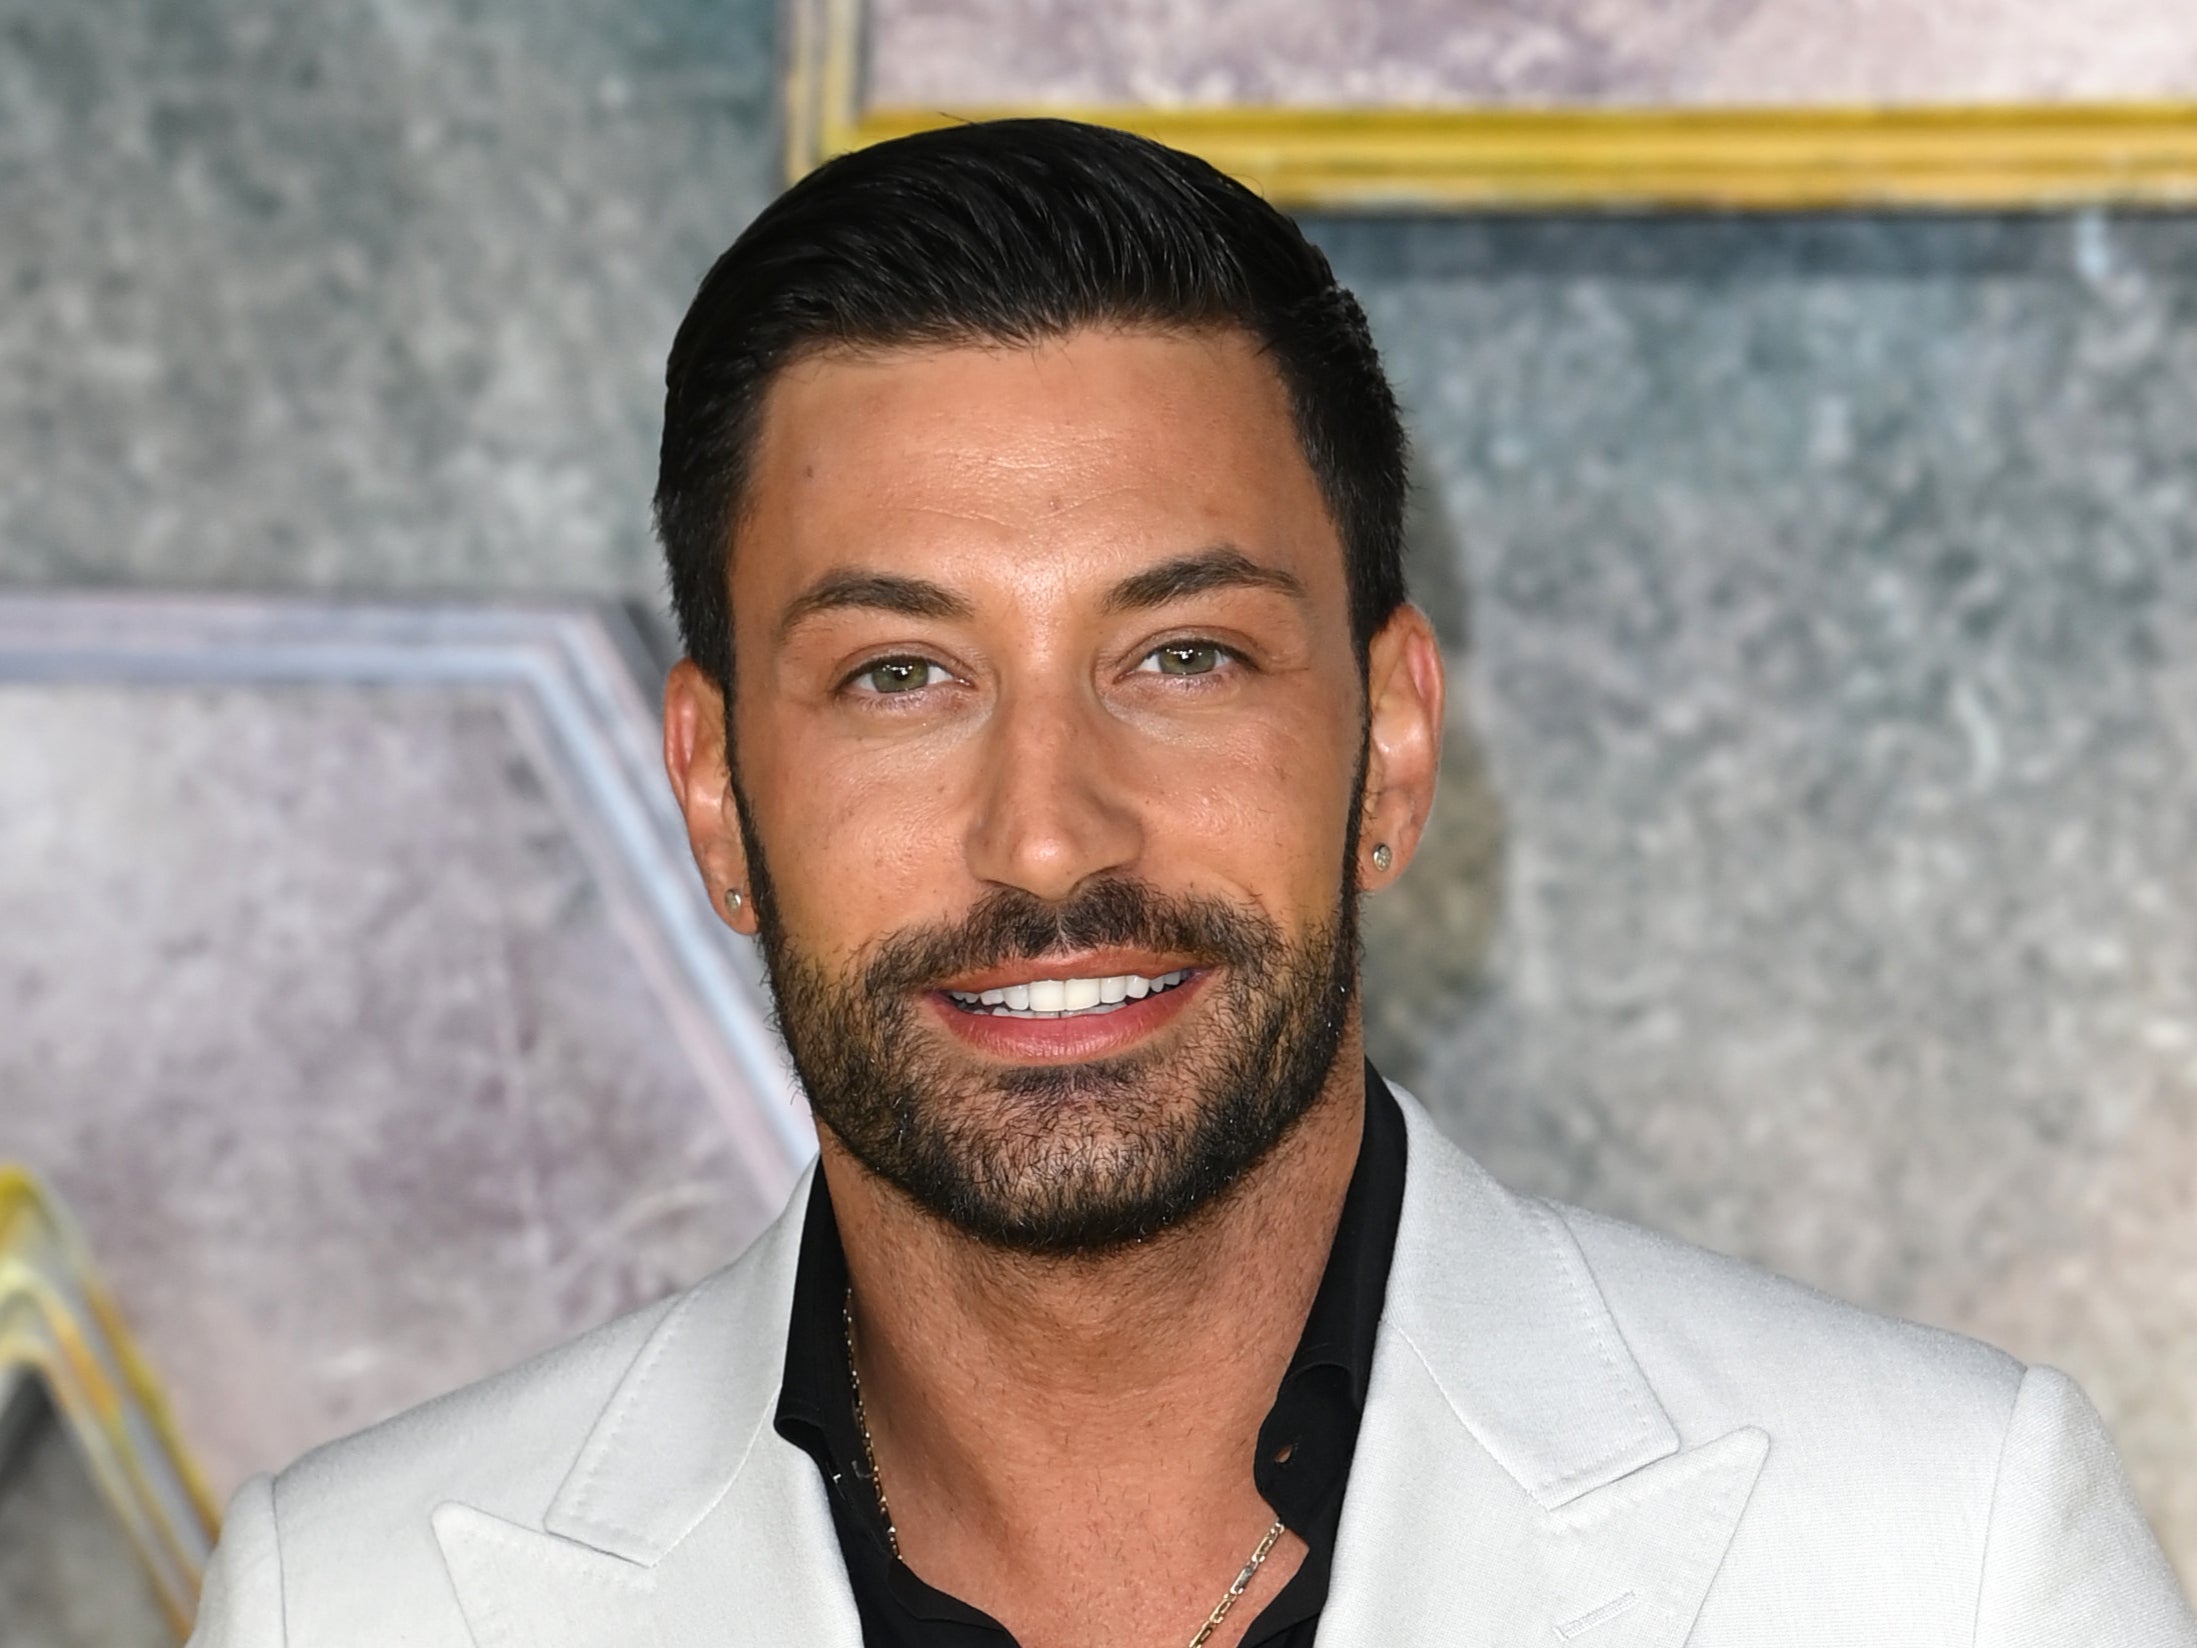 Giovanni Pernice has been a pro on the show since 2015